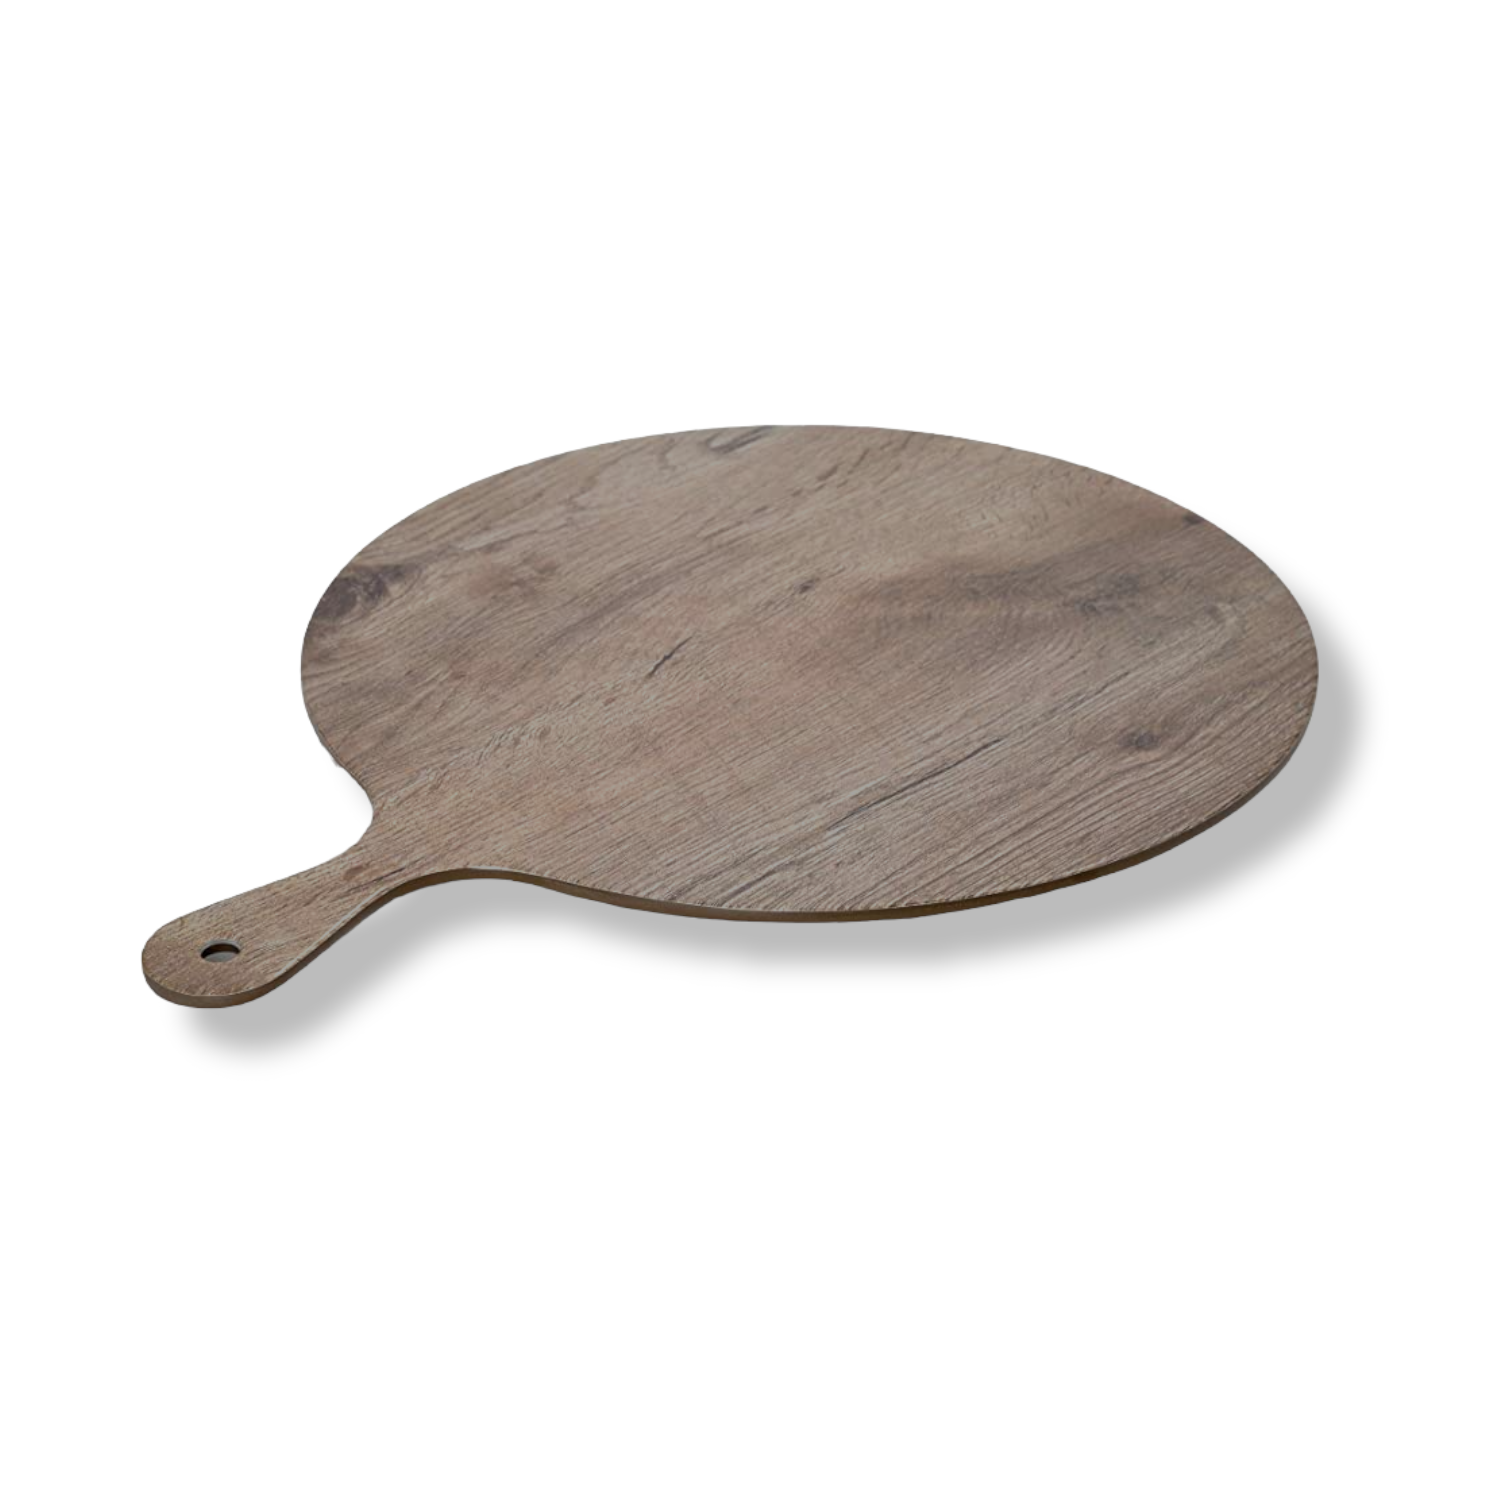 32cm Melamine round plate with a handle and a wooden-look finish - Lunaz Shop